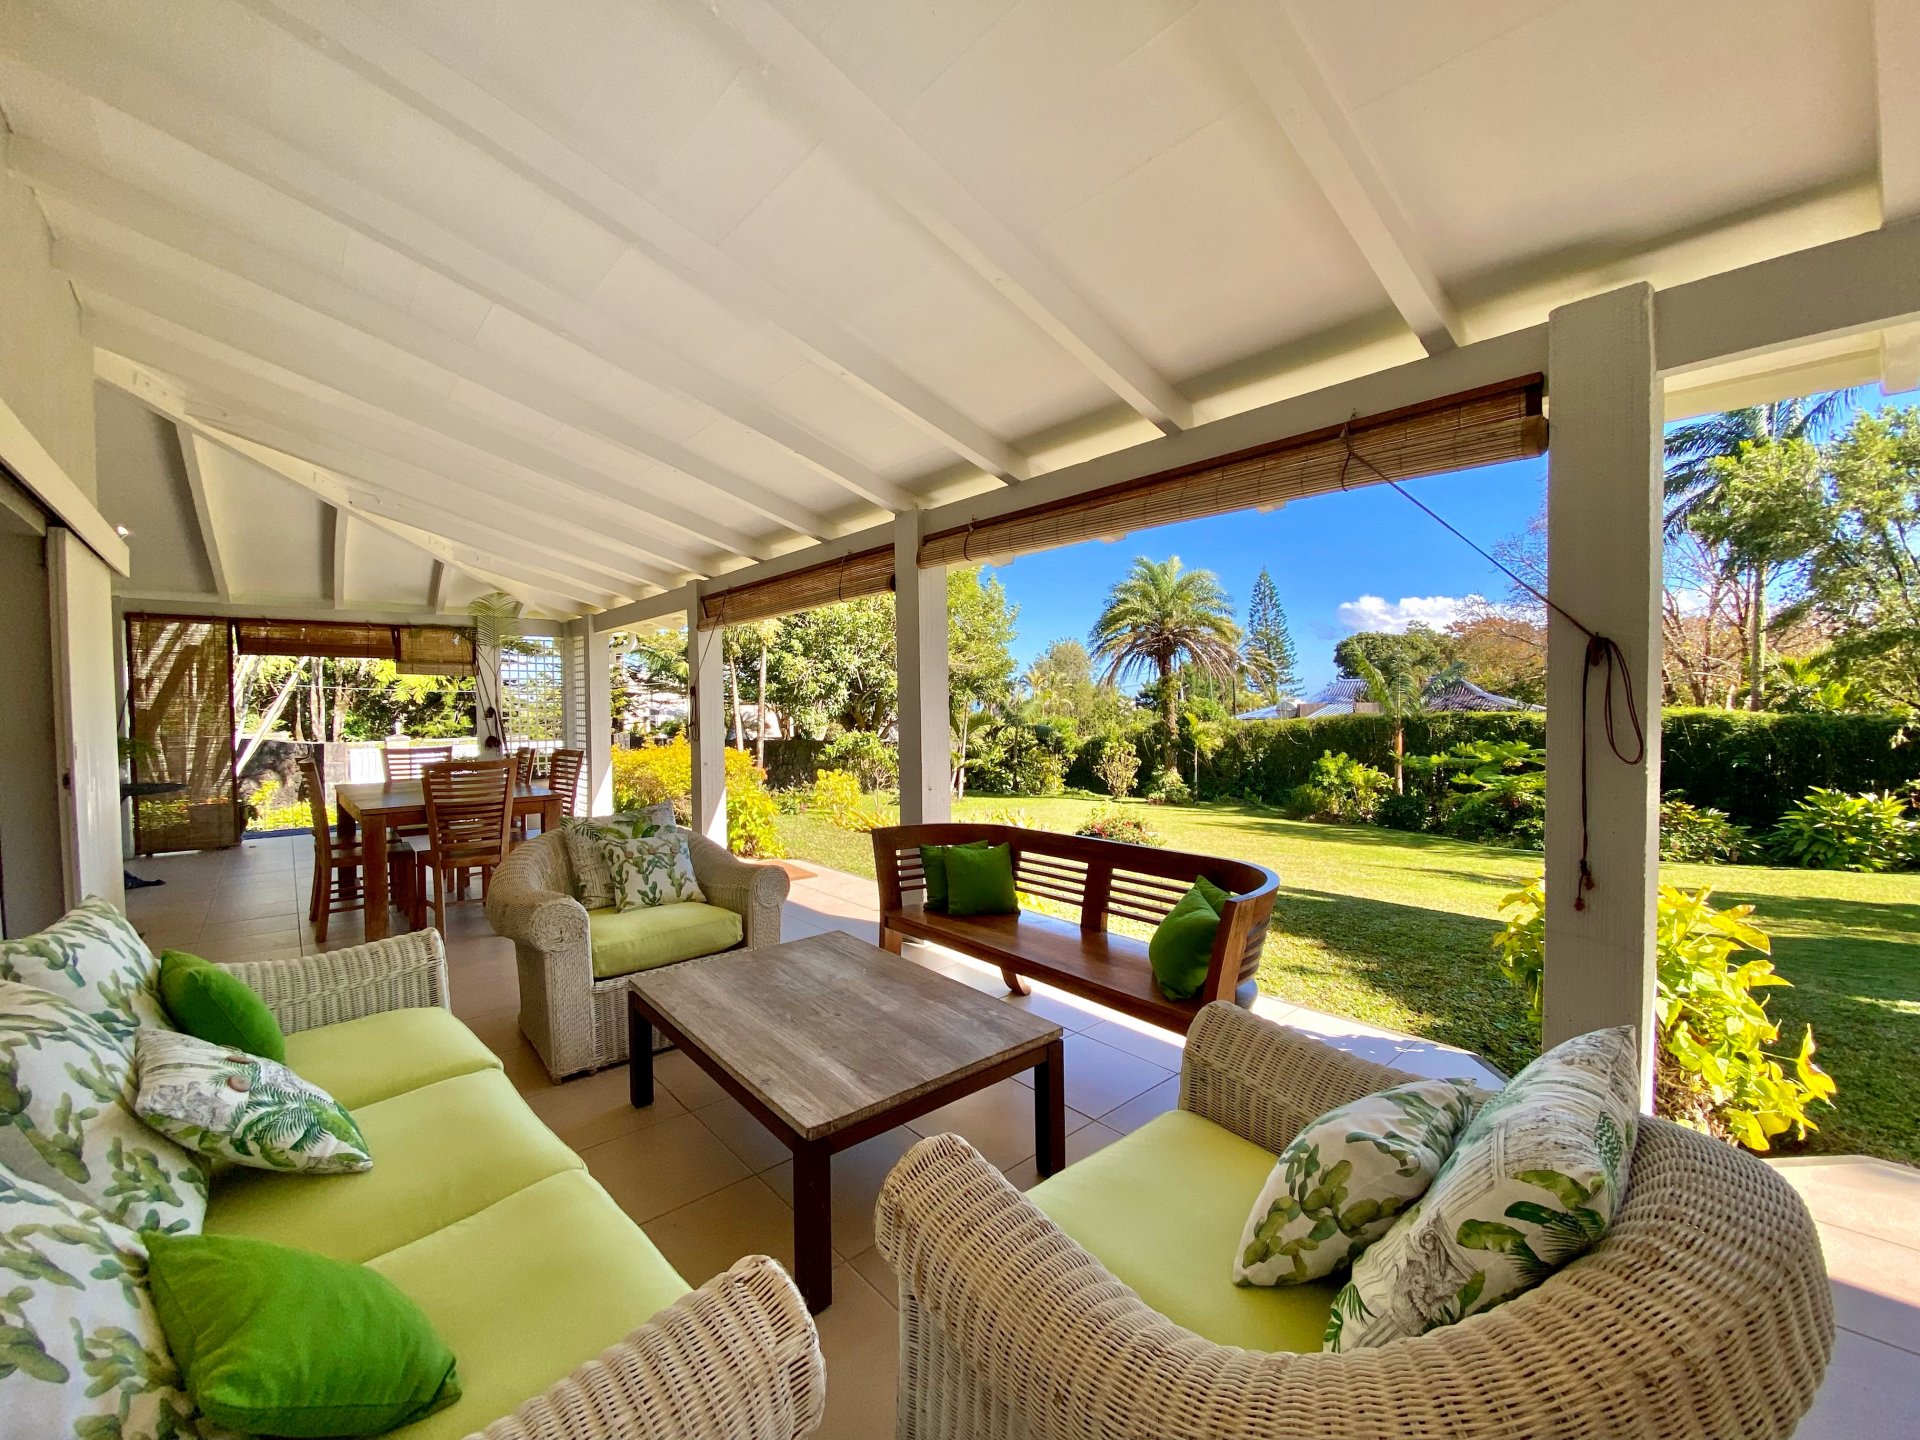 Is it the right time for a rental in Mauritius?